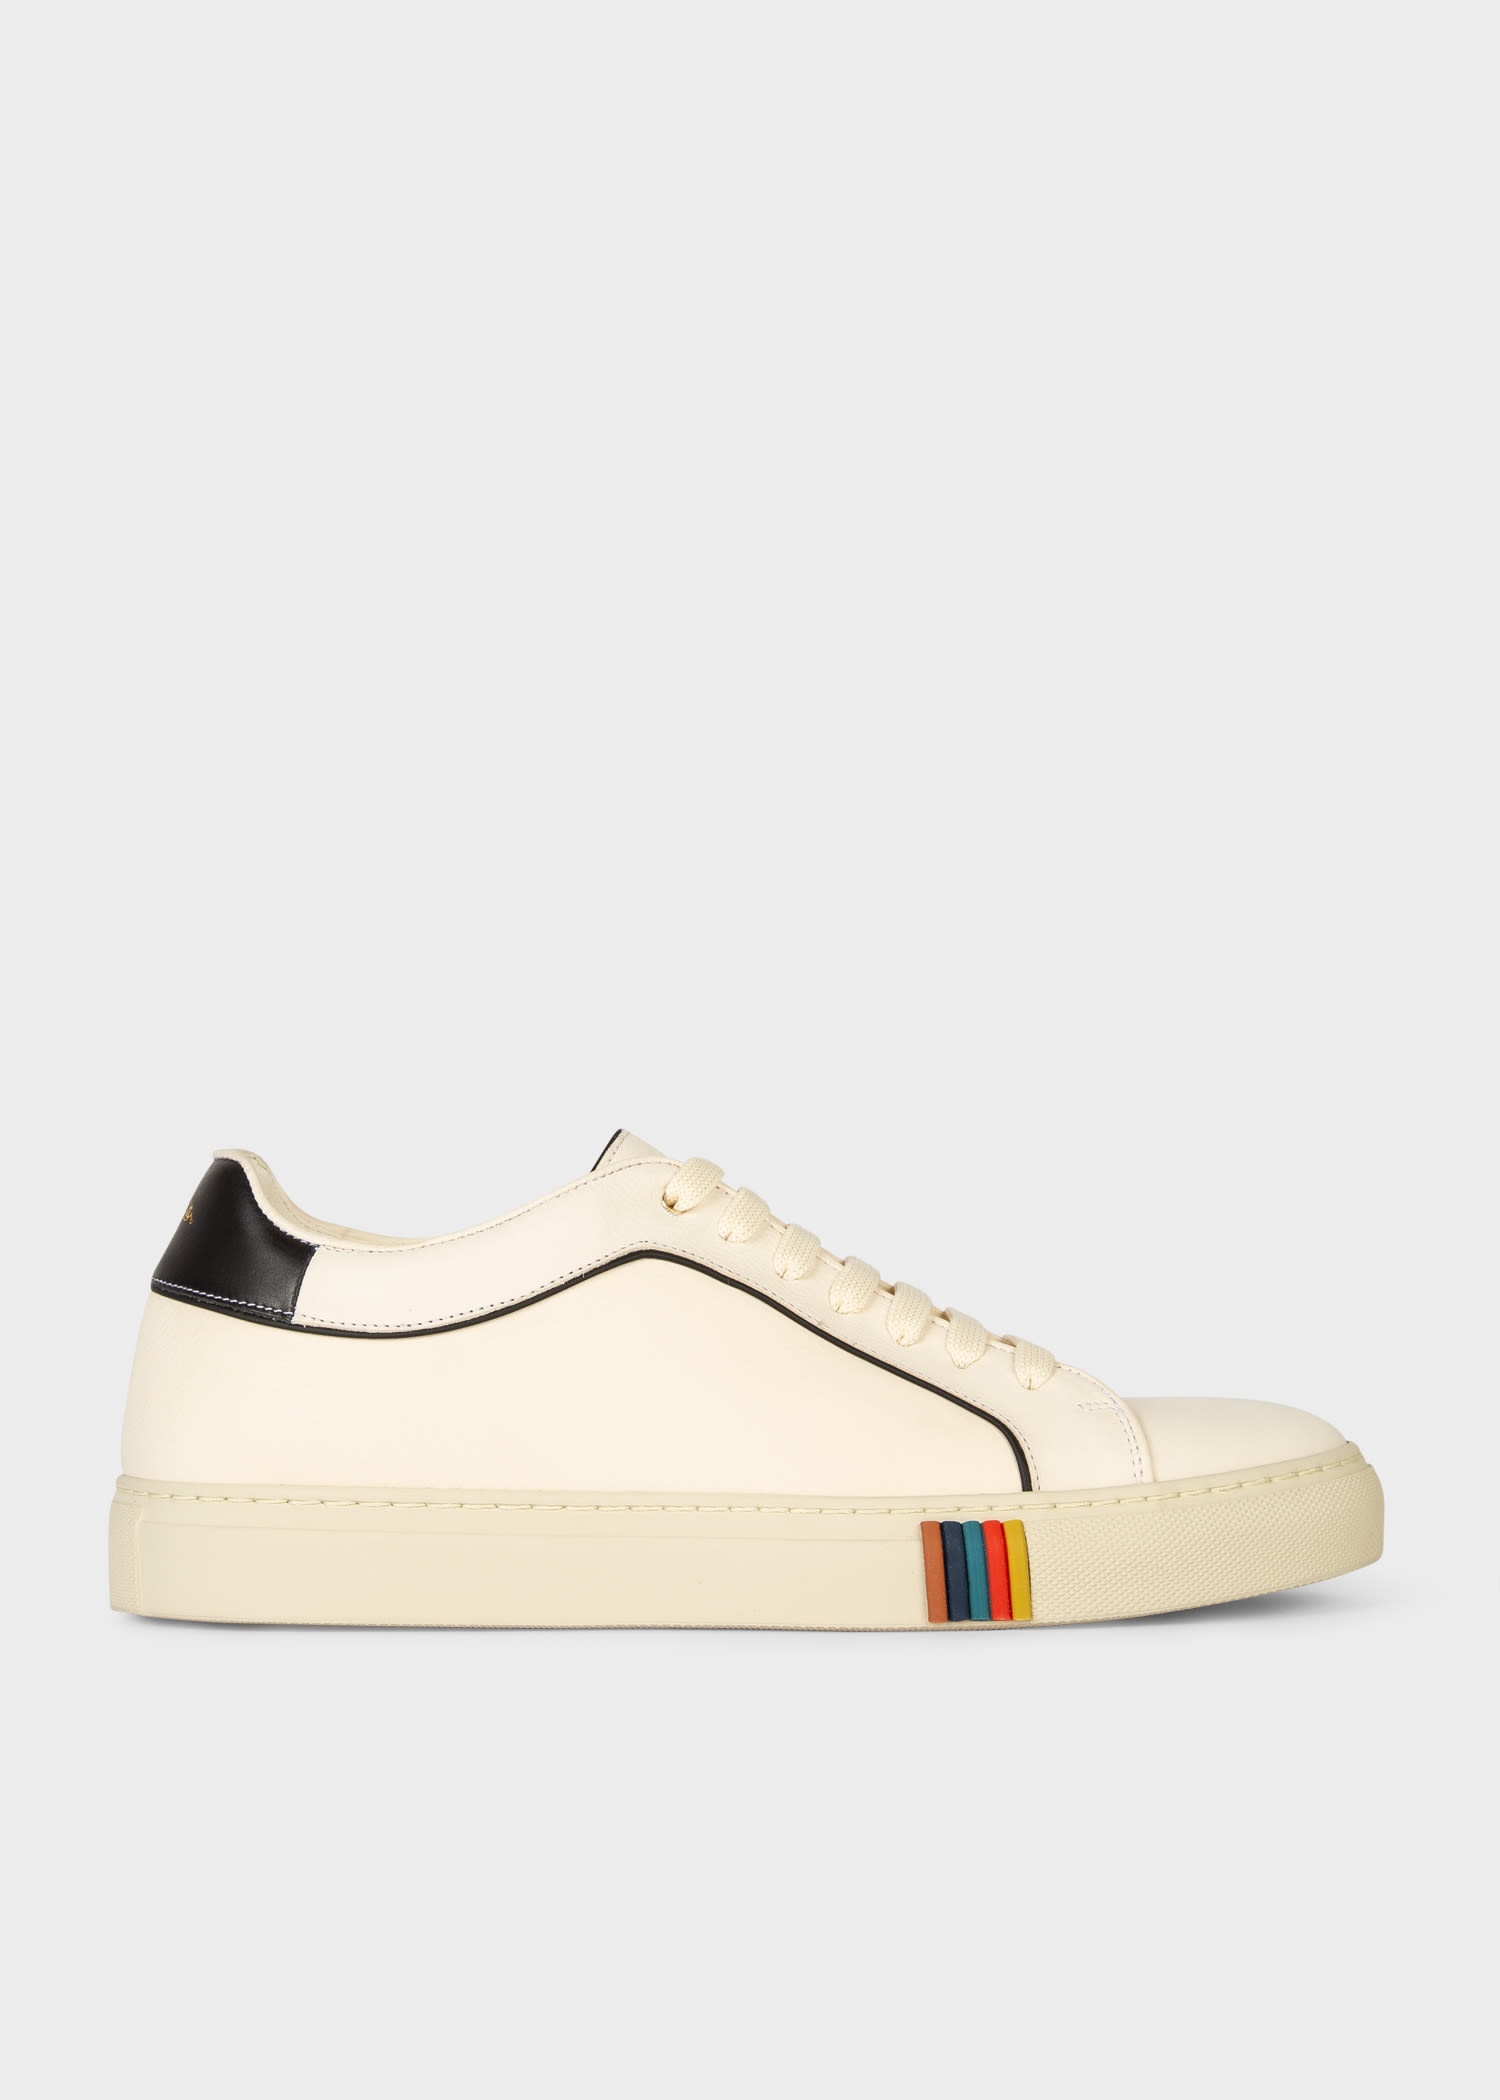 'Basso' Sneakers With Black Trim - 1